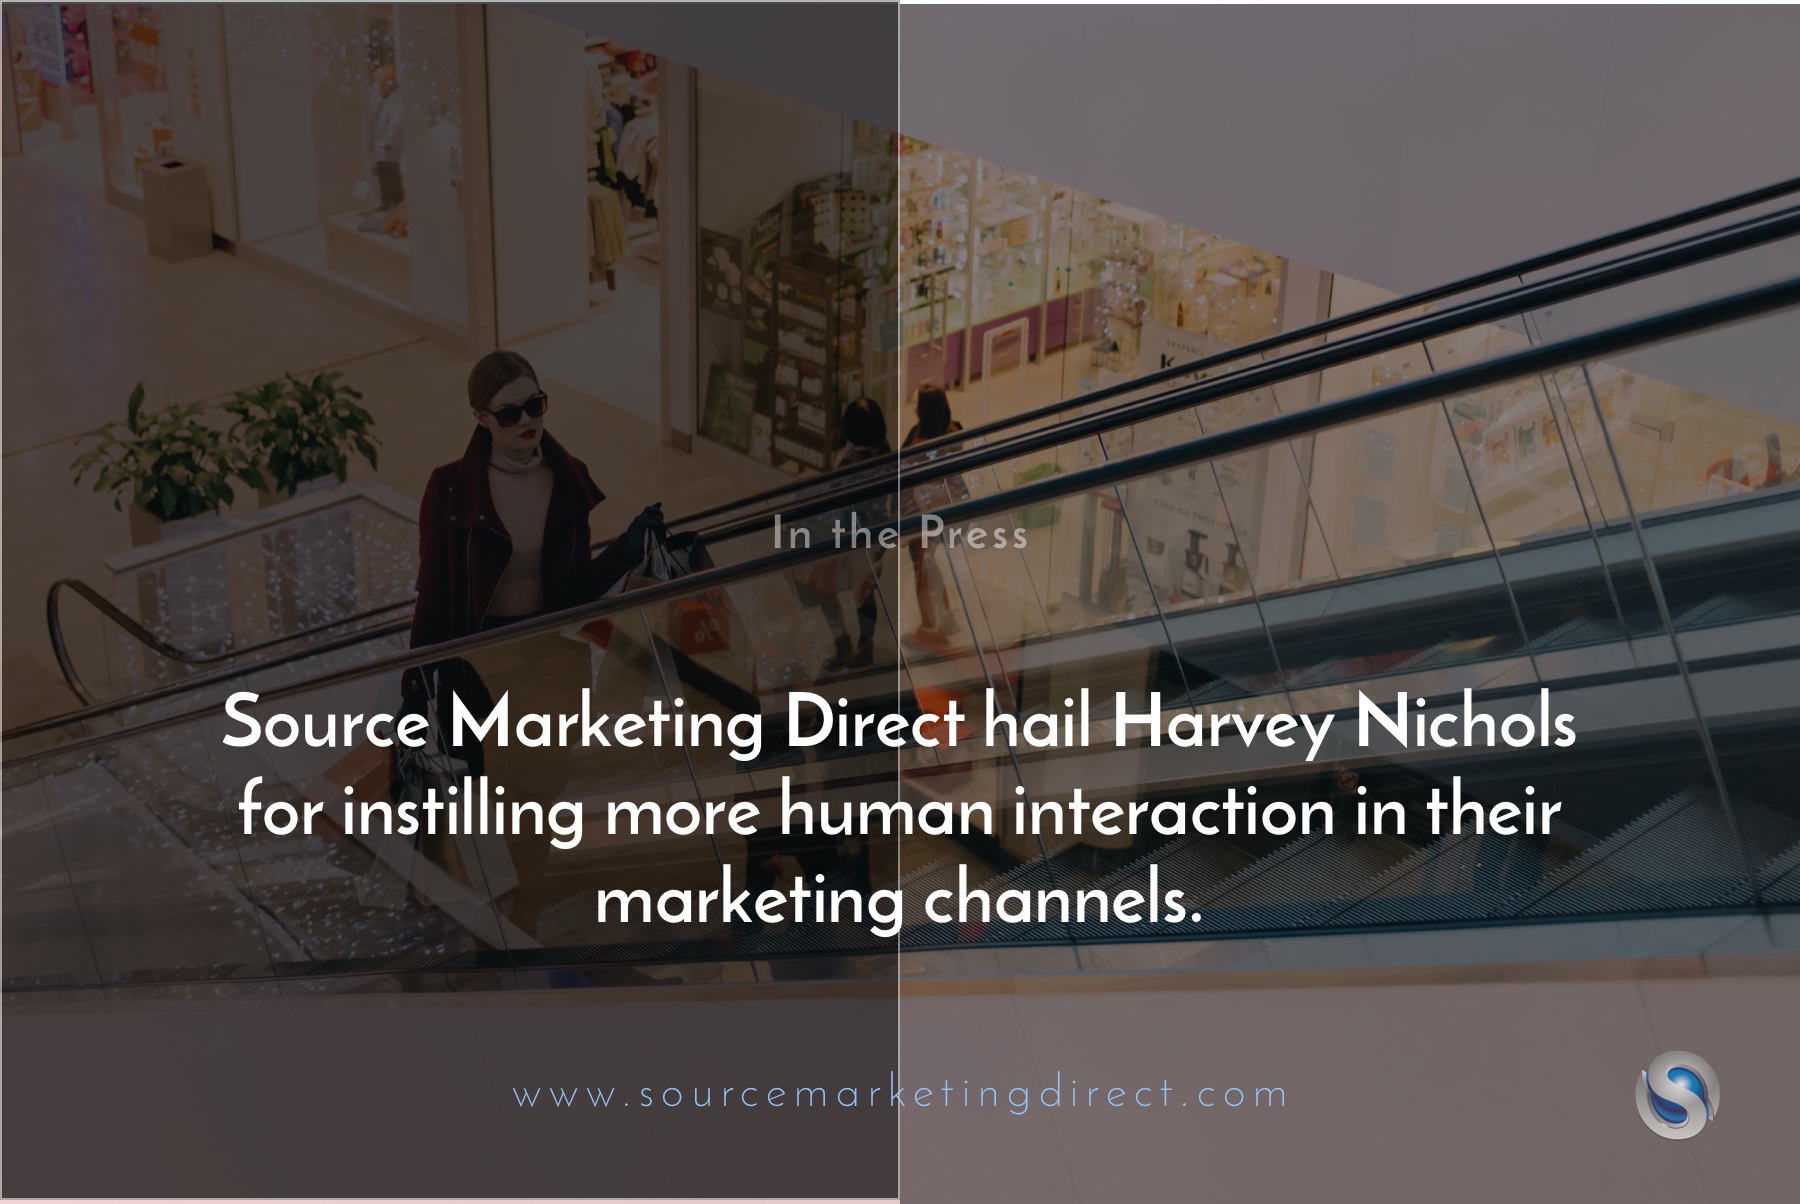 Source Marketing Direct hail Harvey Nichols for instilling more human interaction in their marketing channels